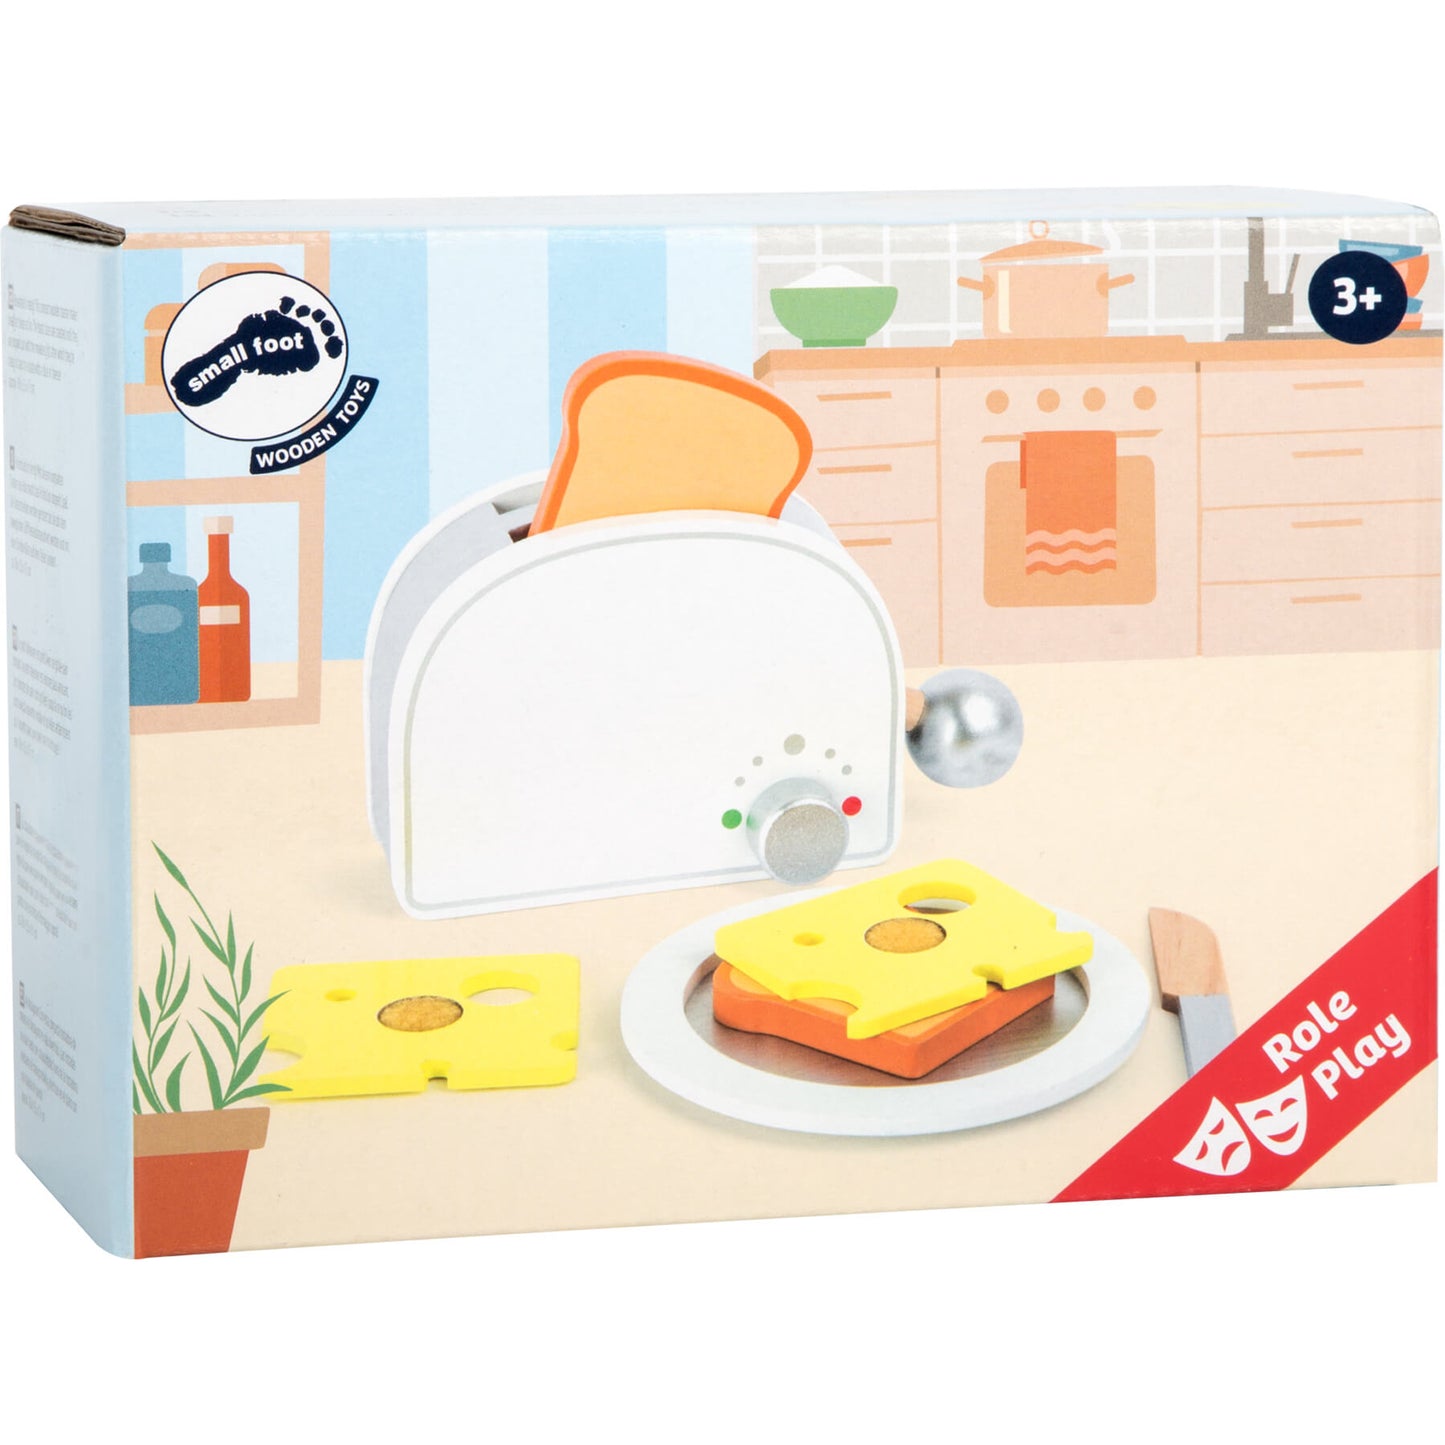 Breakfast Set For Play Kitchen